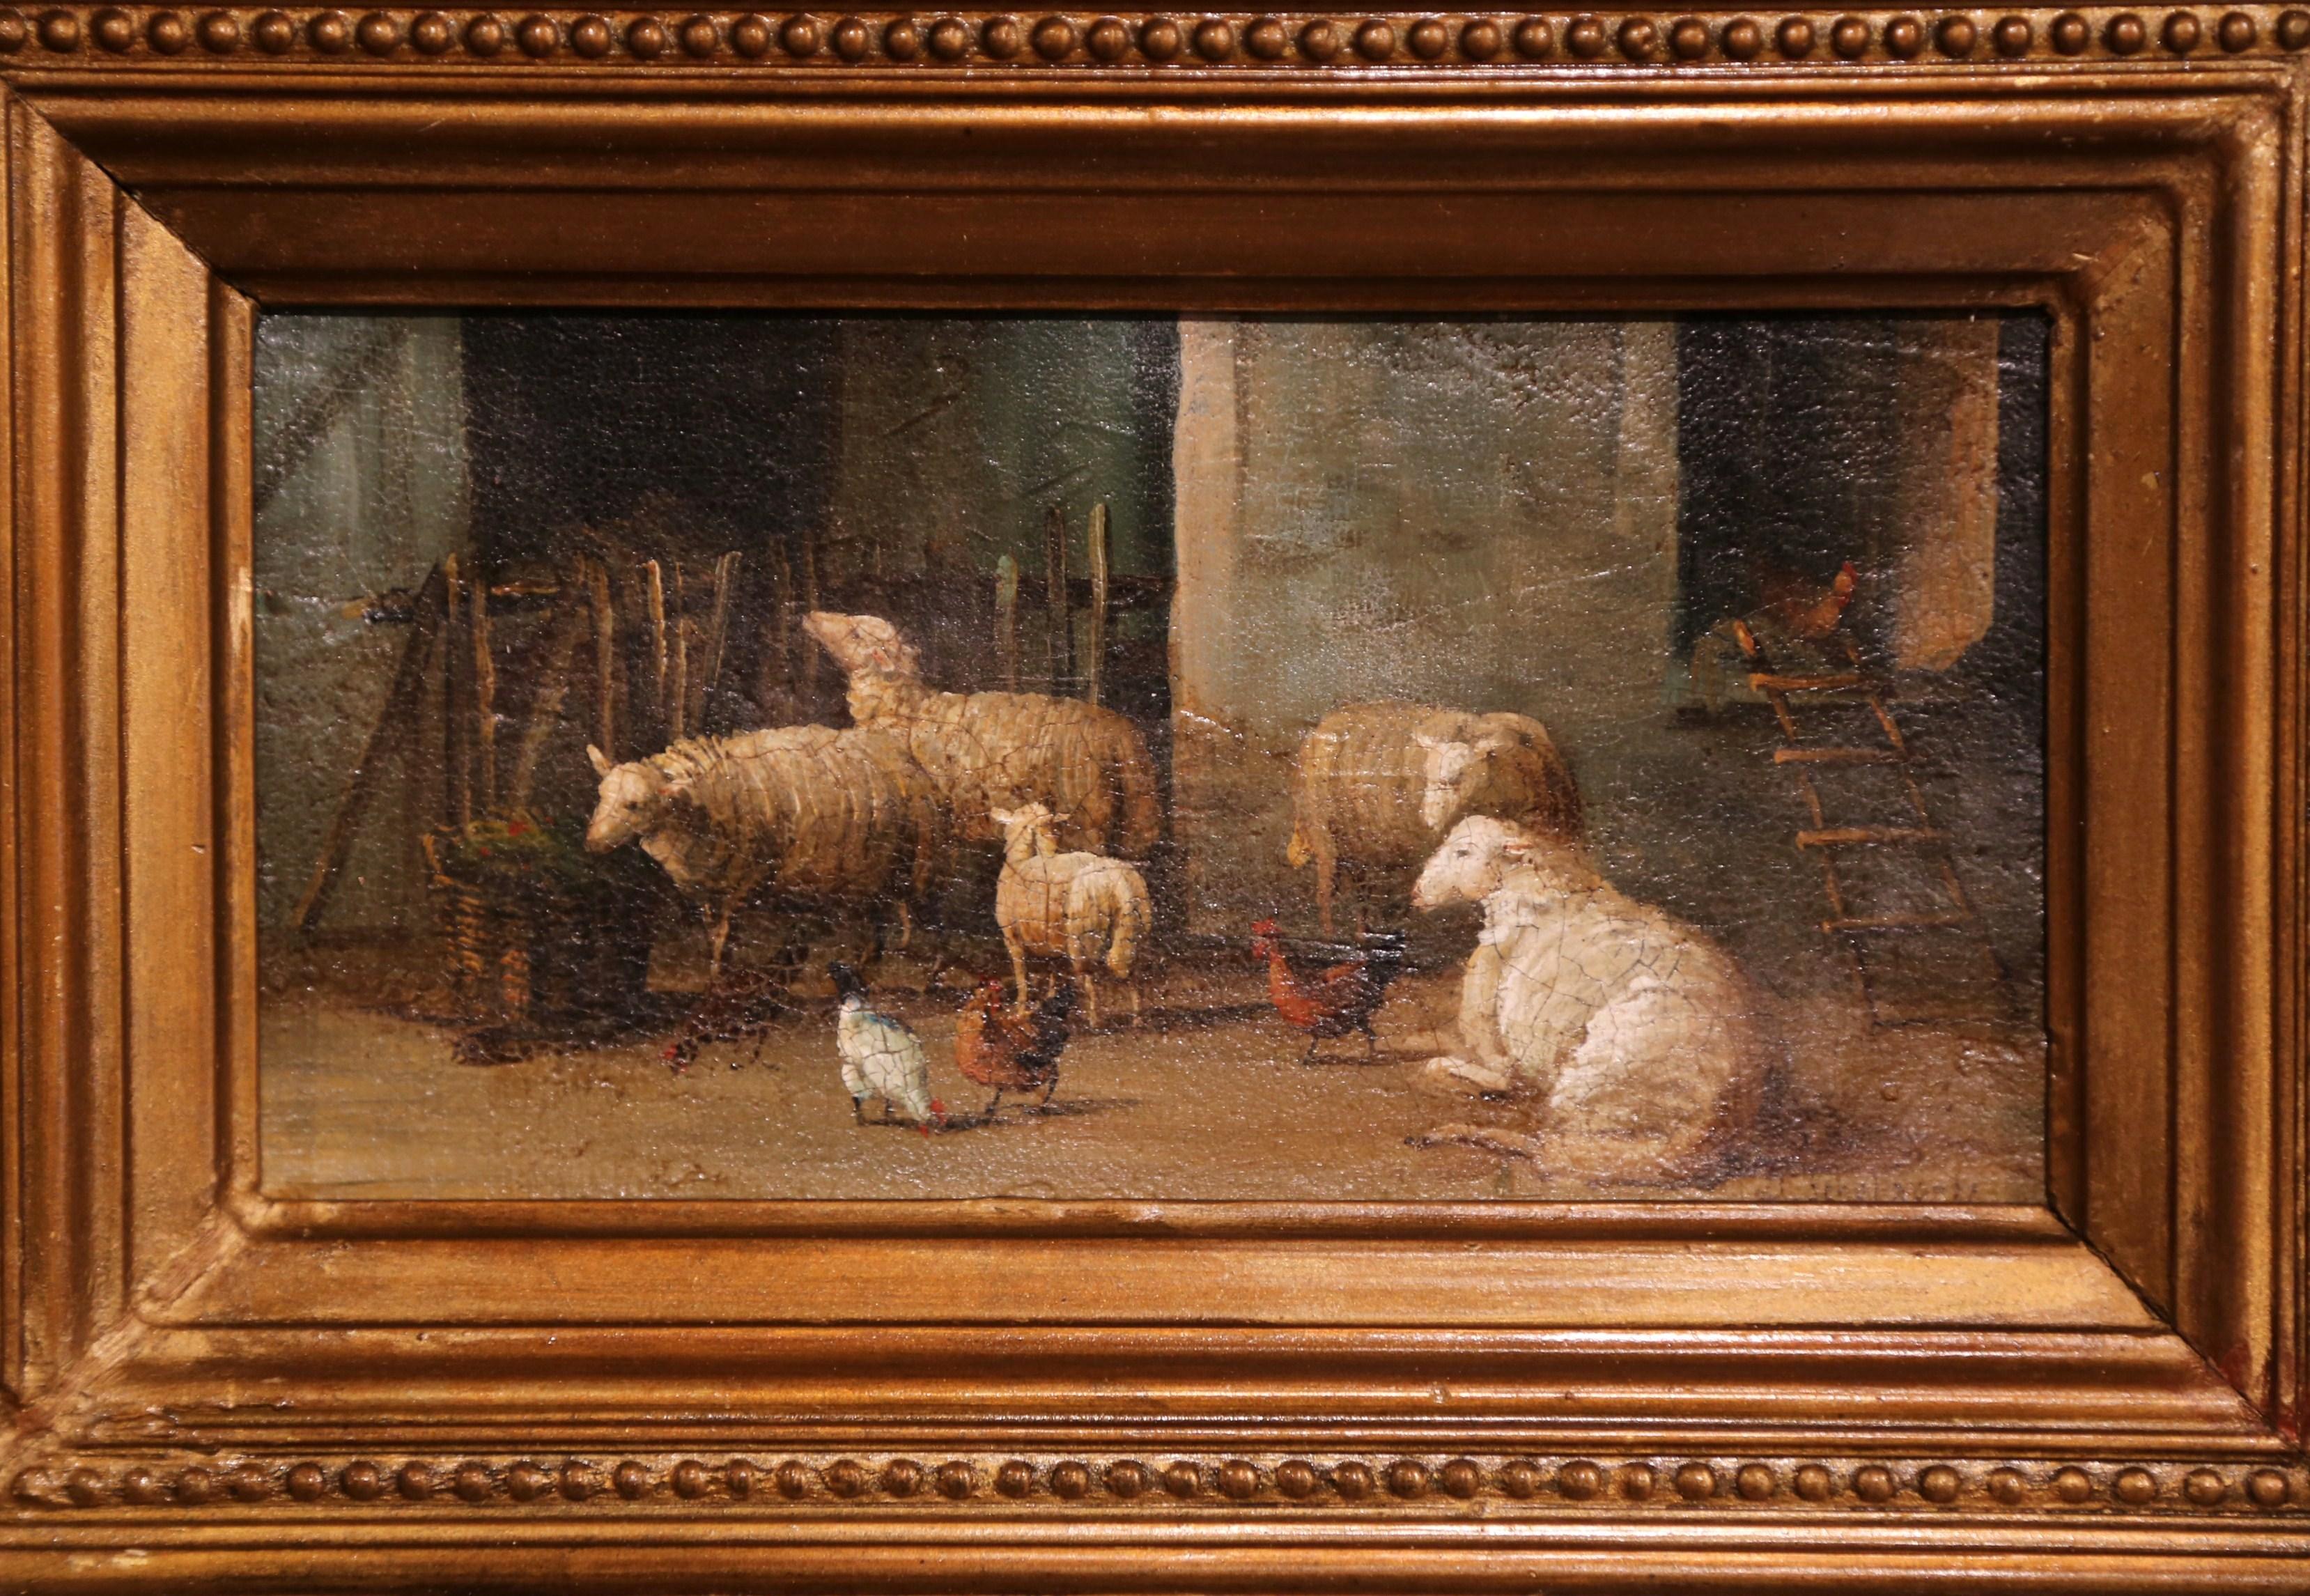 19th Century Sheep Painting in Carved Gilt Wood Frame Signed J. Scholaerts 1